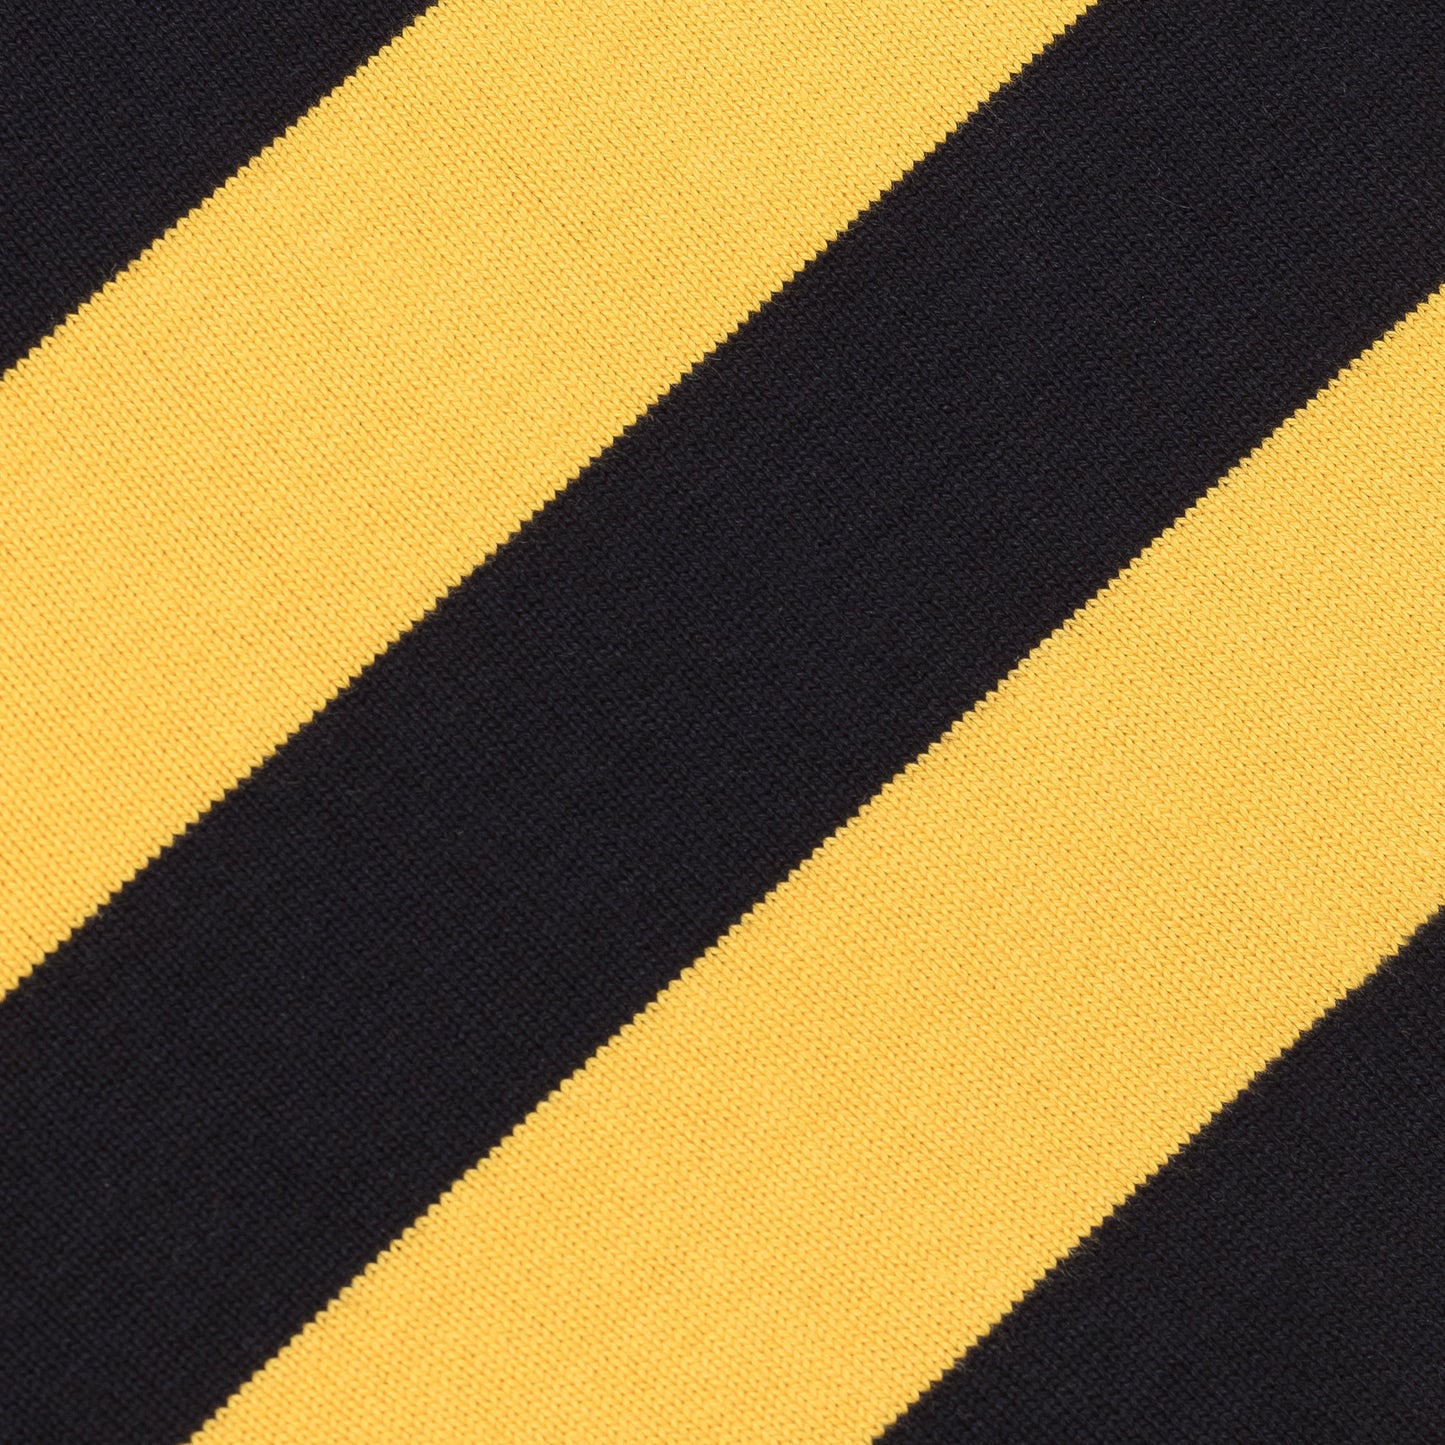 Black and yellow stripes.